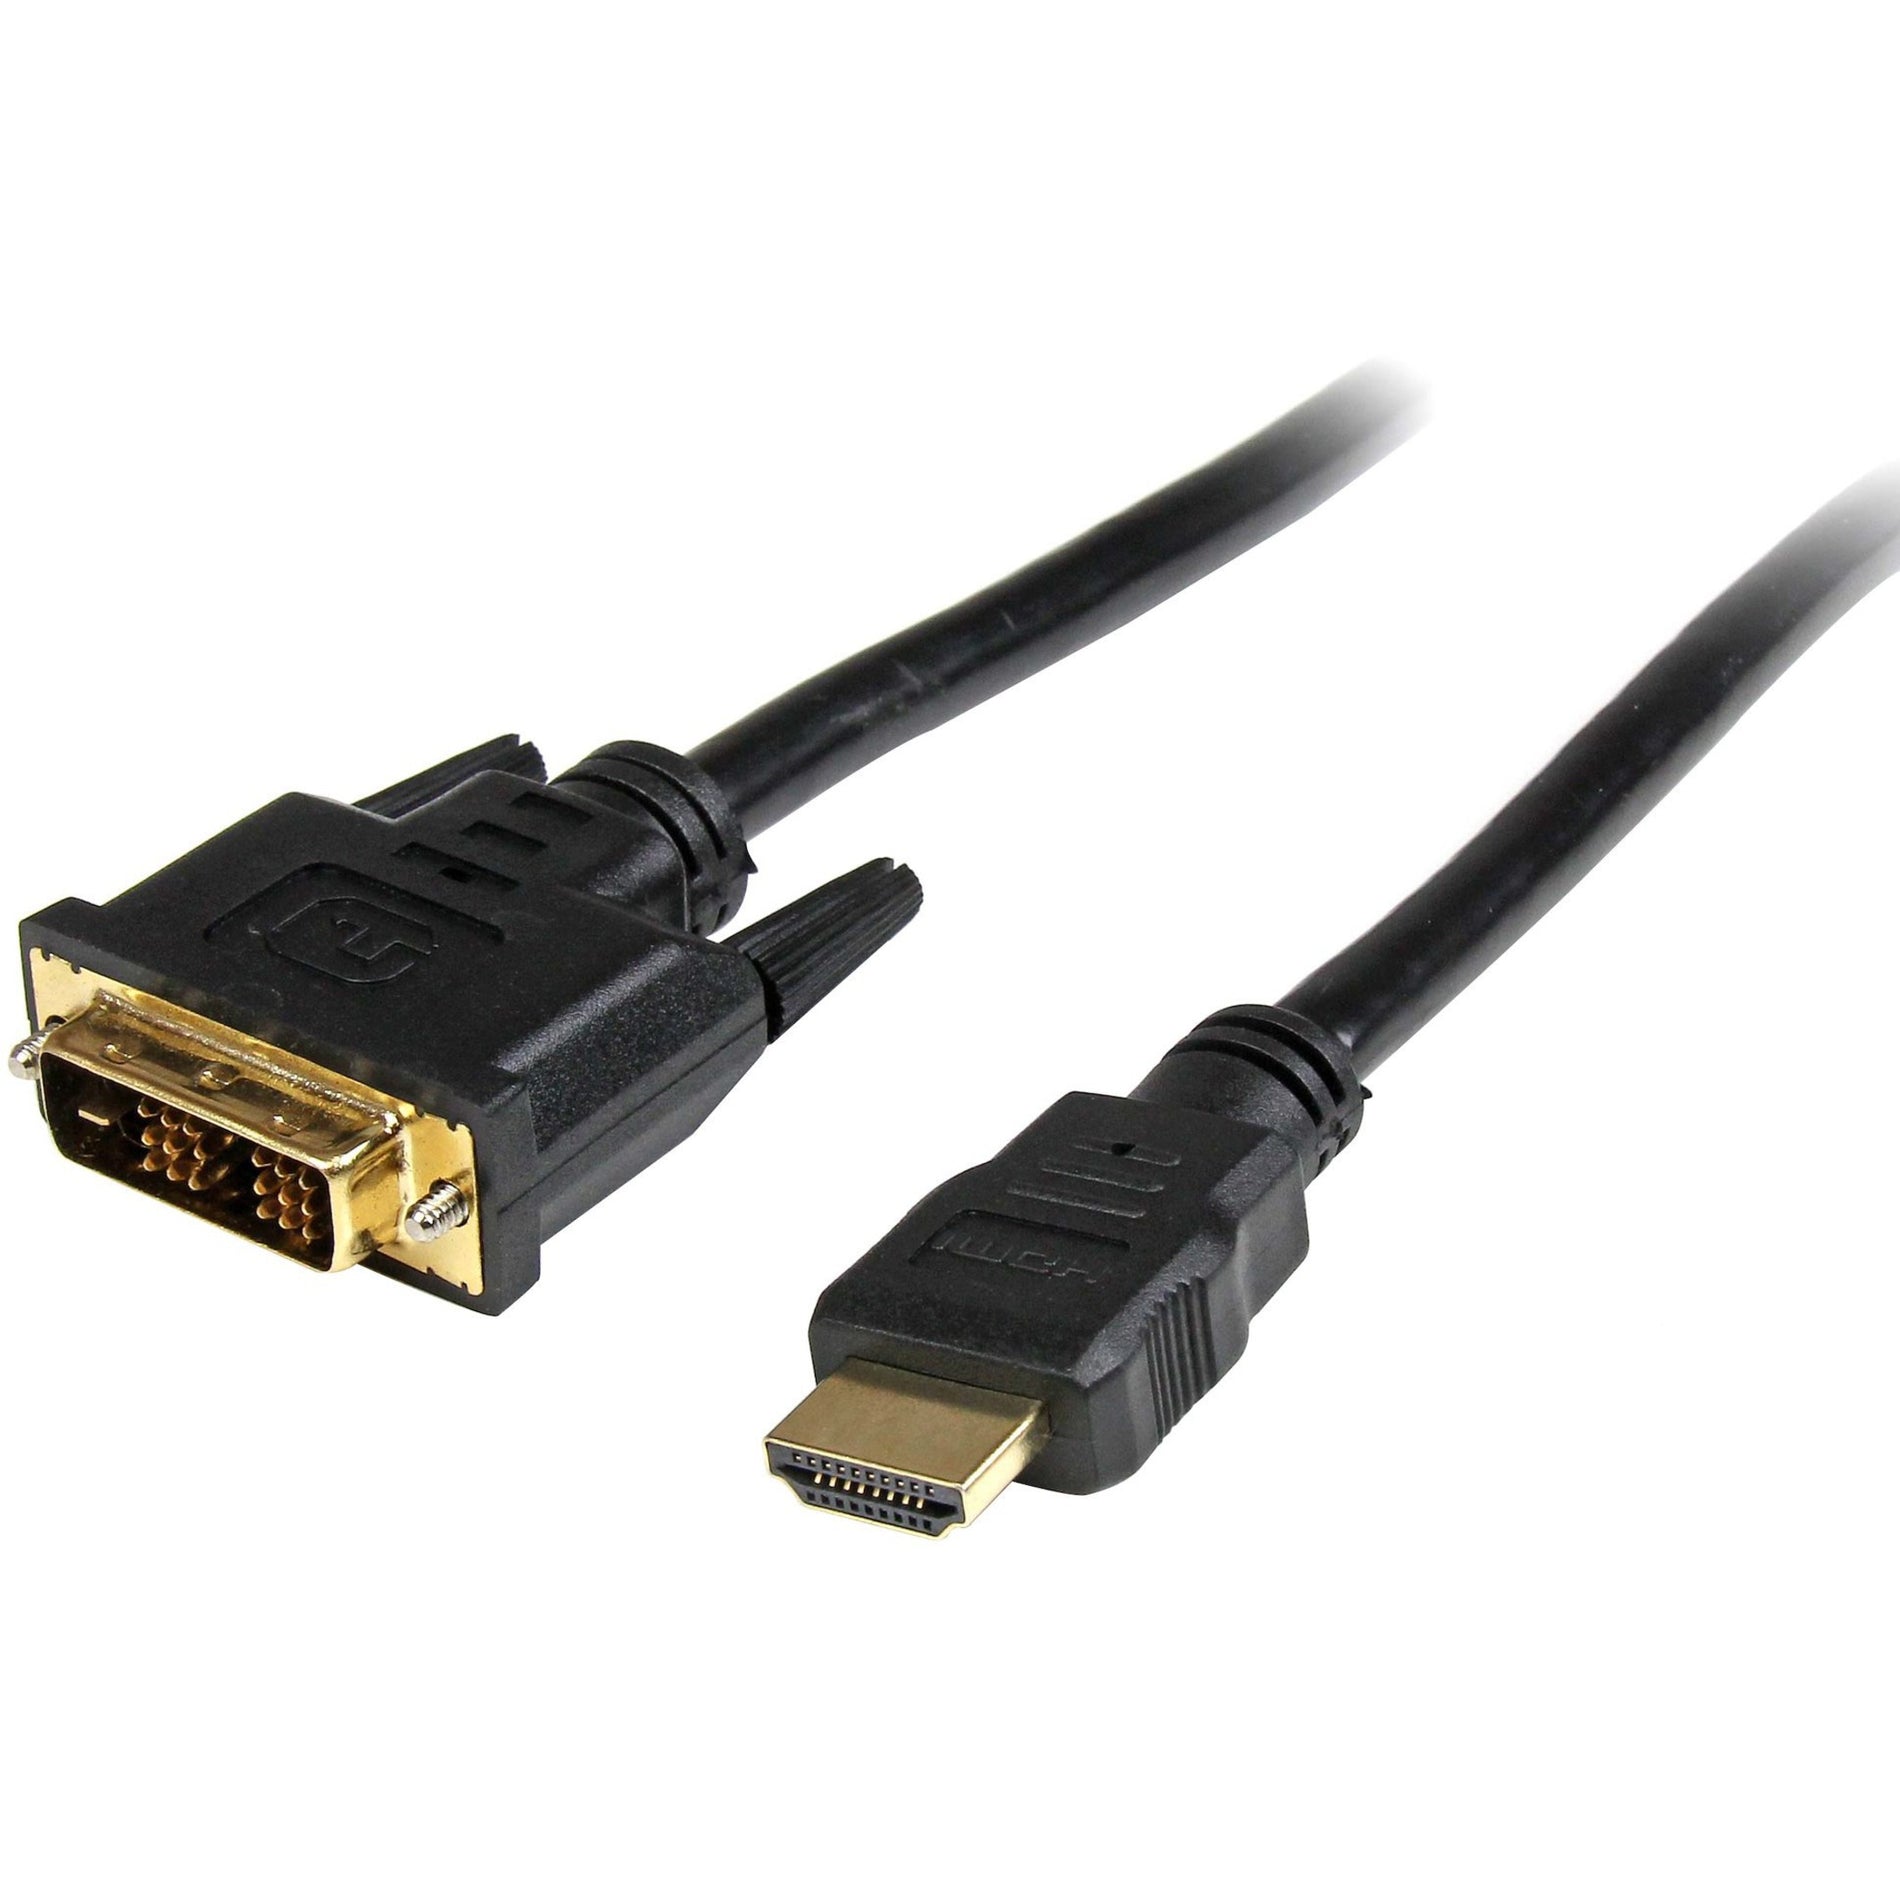 StarTech.com HDMIDVIMM10 10 ft HDMI to DVI-D Cable - M/M, Molded, Passive, Strain Relief, Copper Conductor, Shielded, 28 AWG, Nickel Plated Connectors, Black